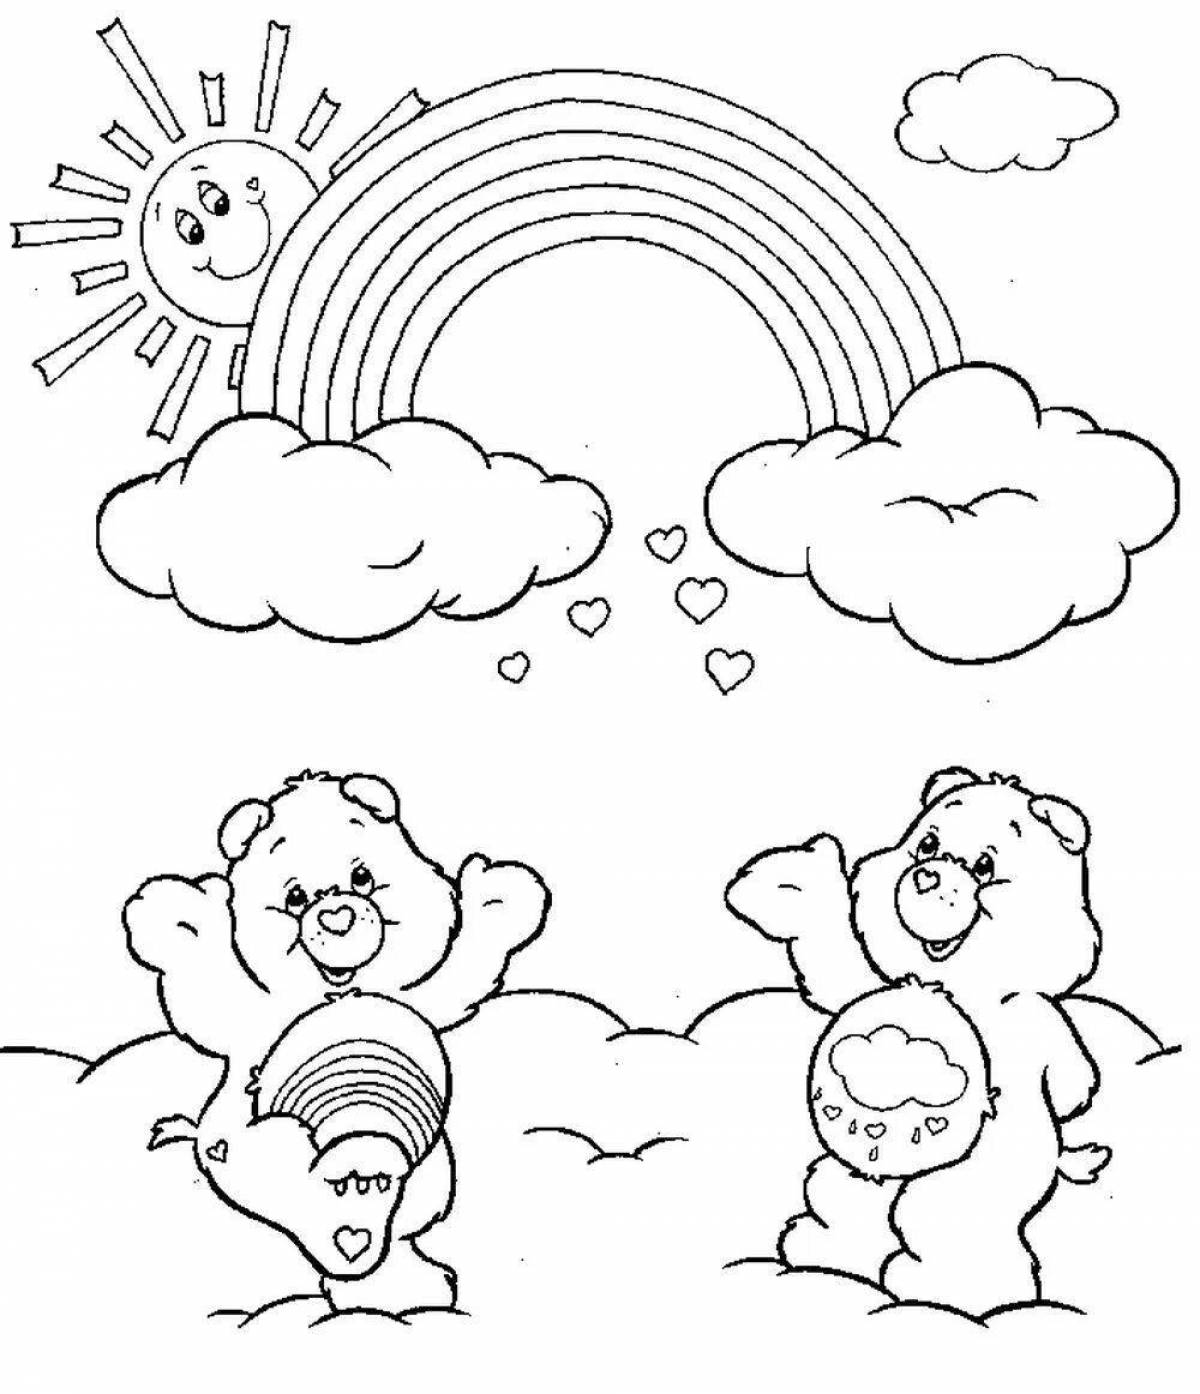 Adorable rainbow coloring book for kids